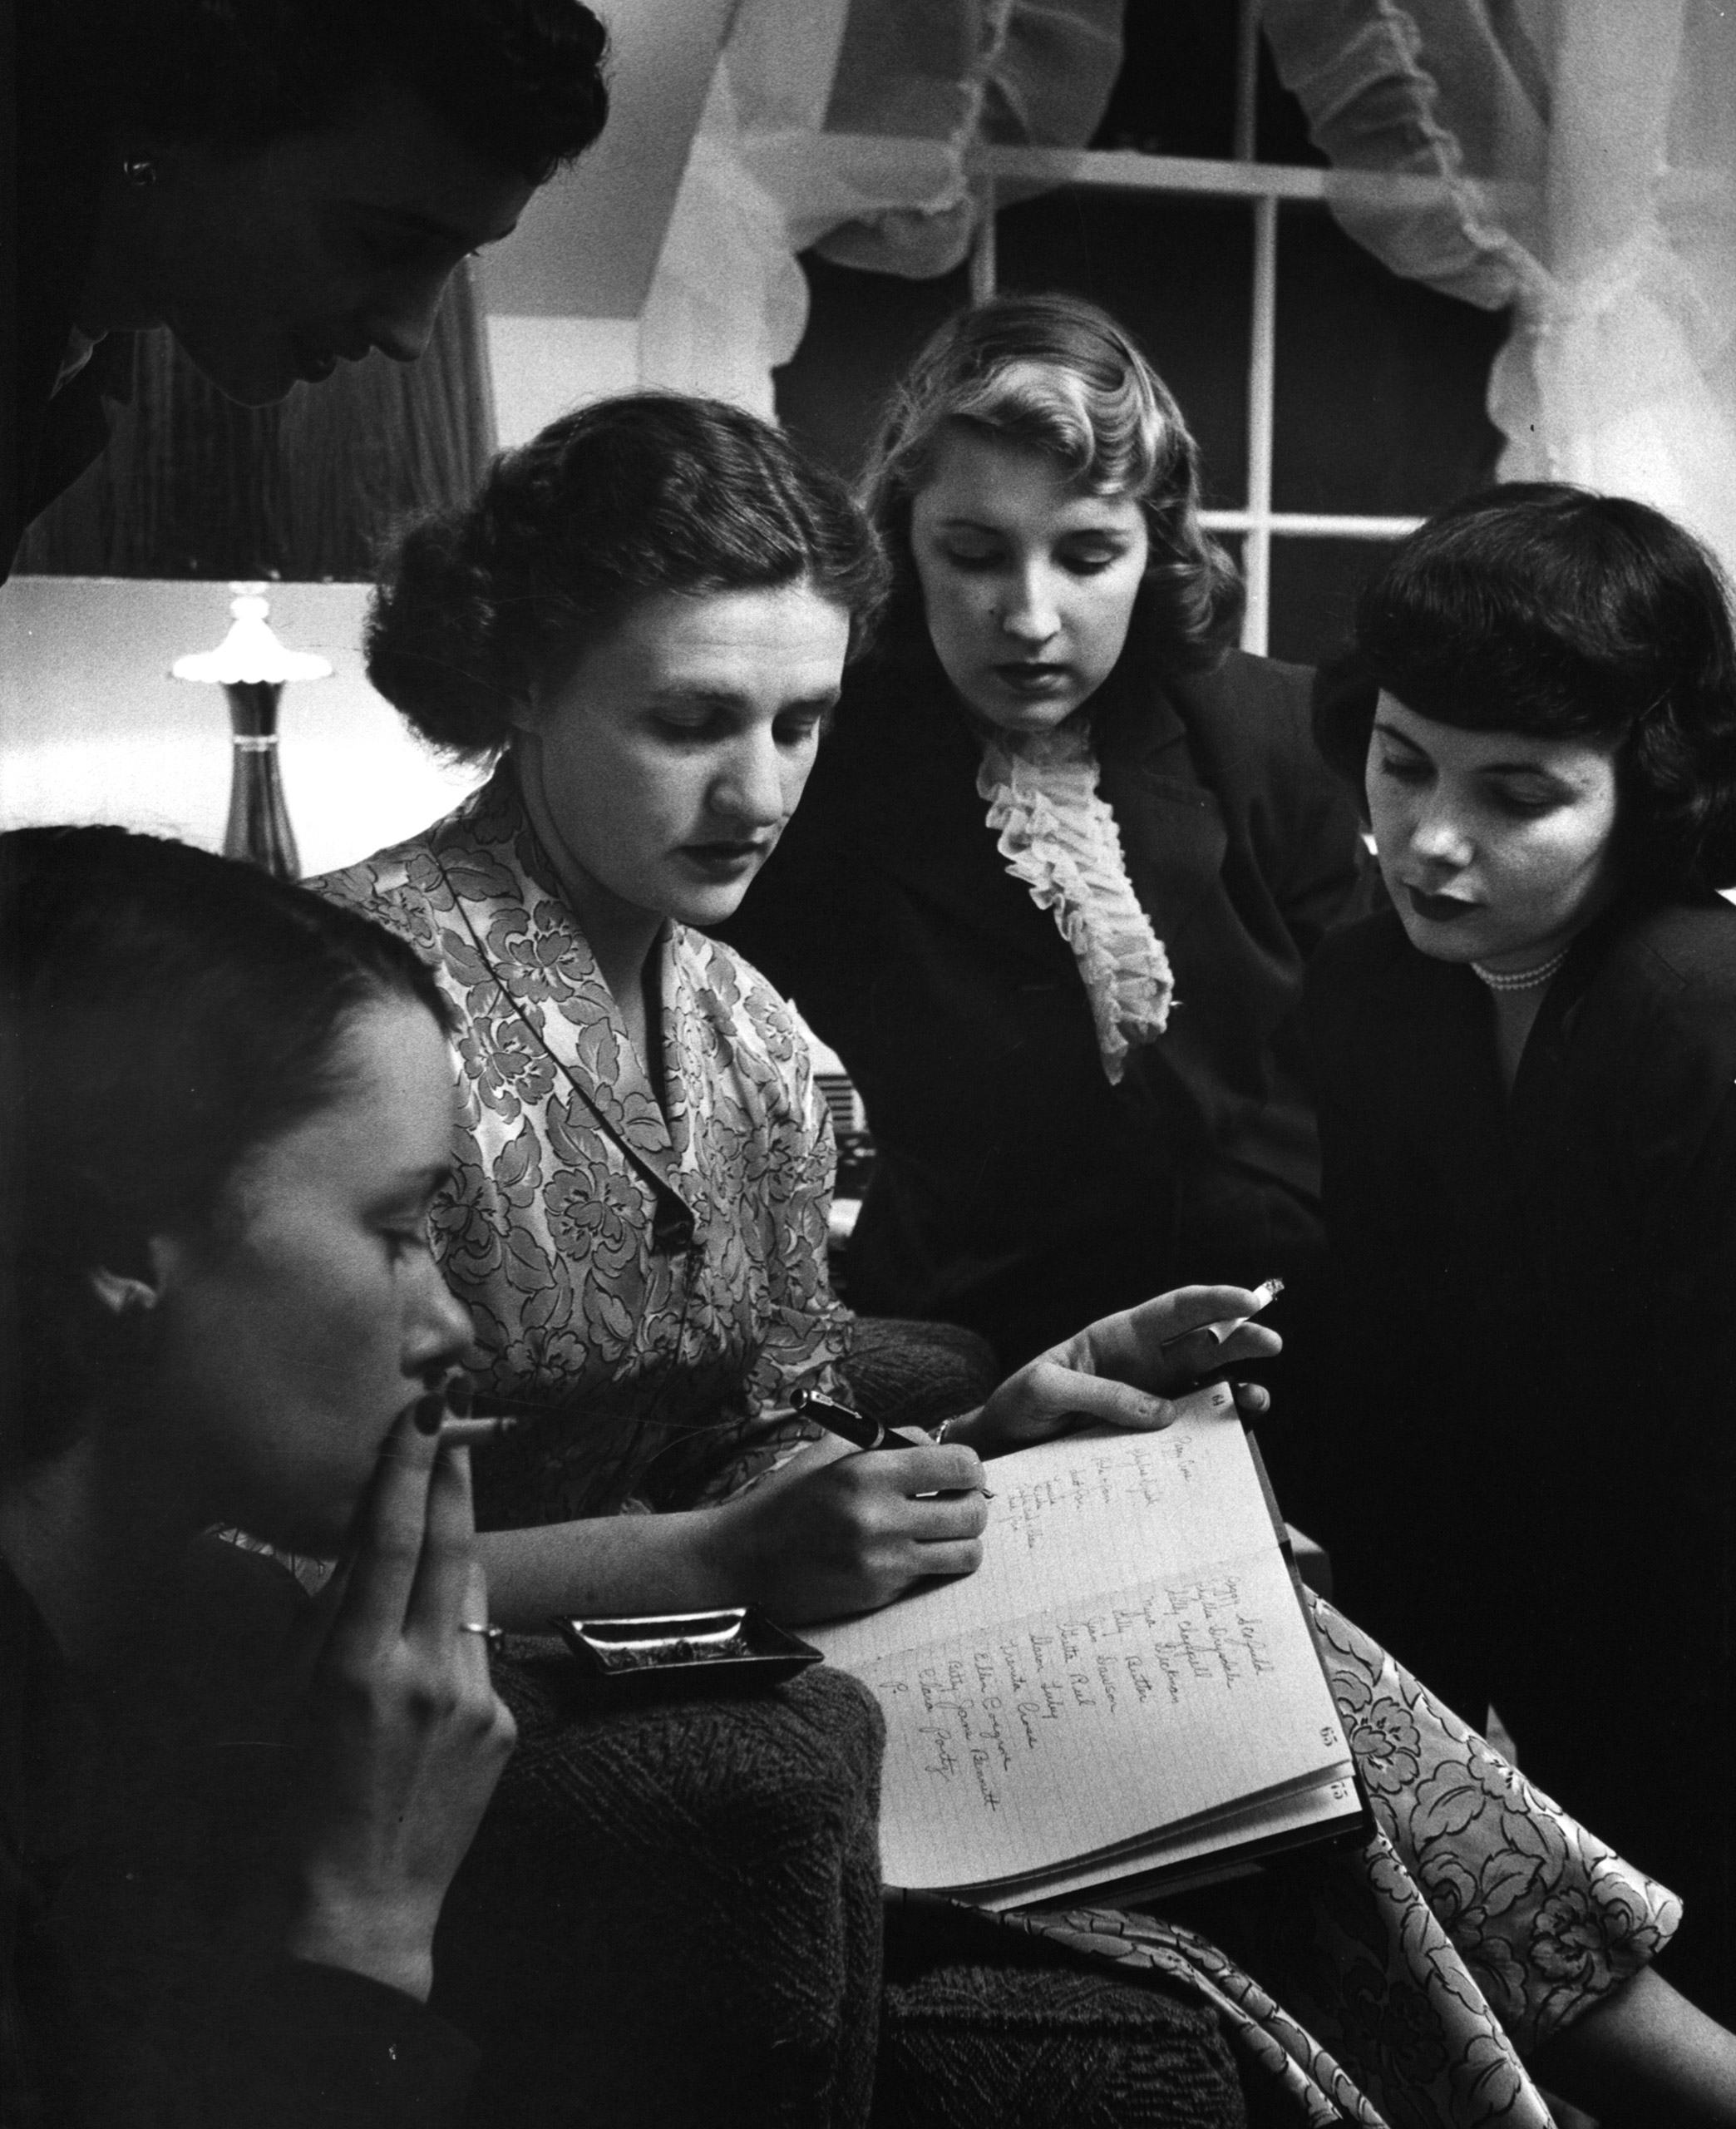 Shower guests signing a book.